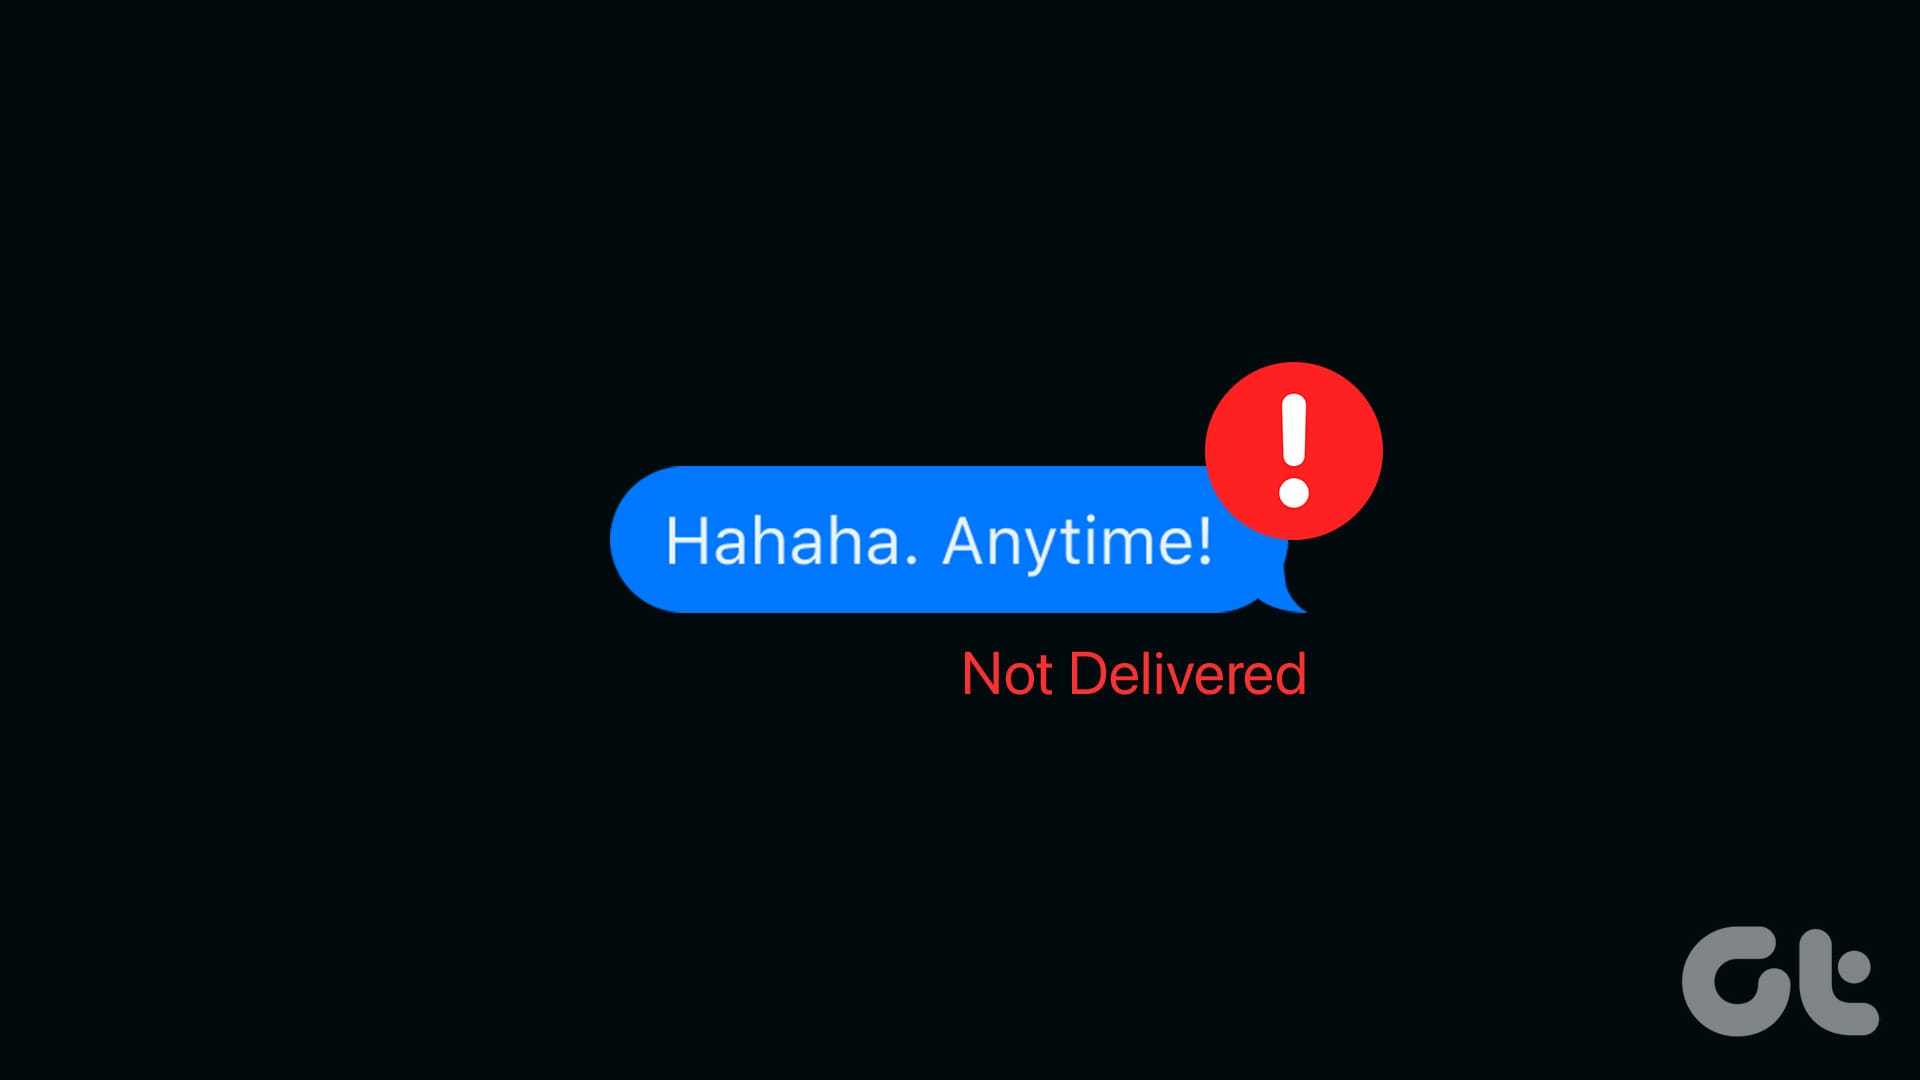 How to Fix iMessage Not Delivered Error on iPhone